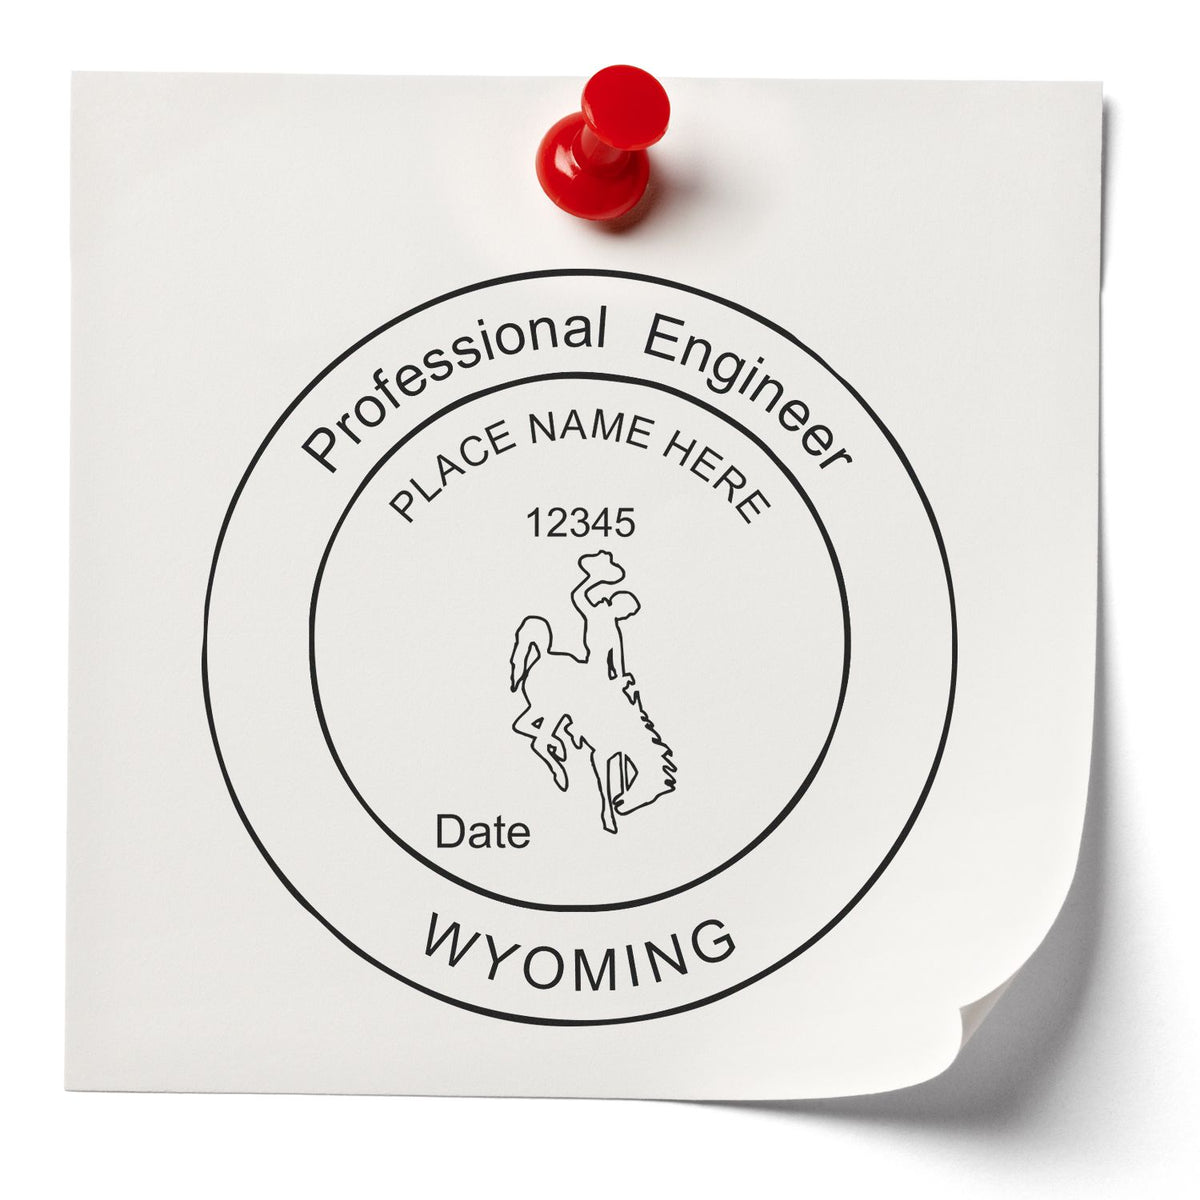 Another Example of a stamped impression of the Wyoming Professional Engineer Seal Stamp on a piece of office paper.